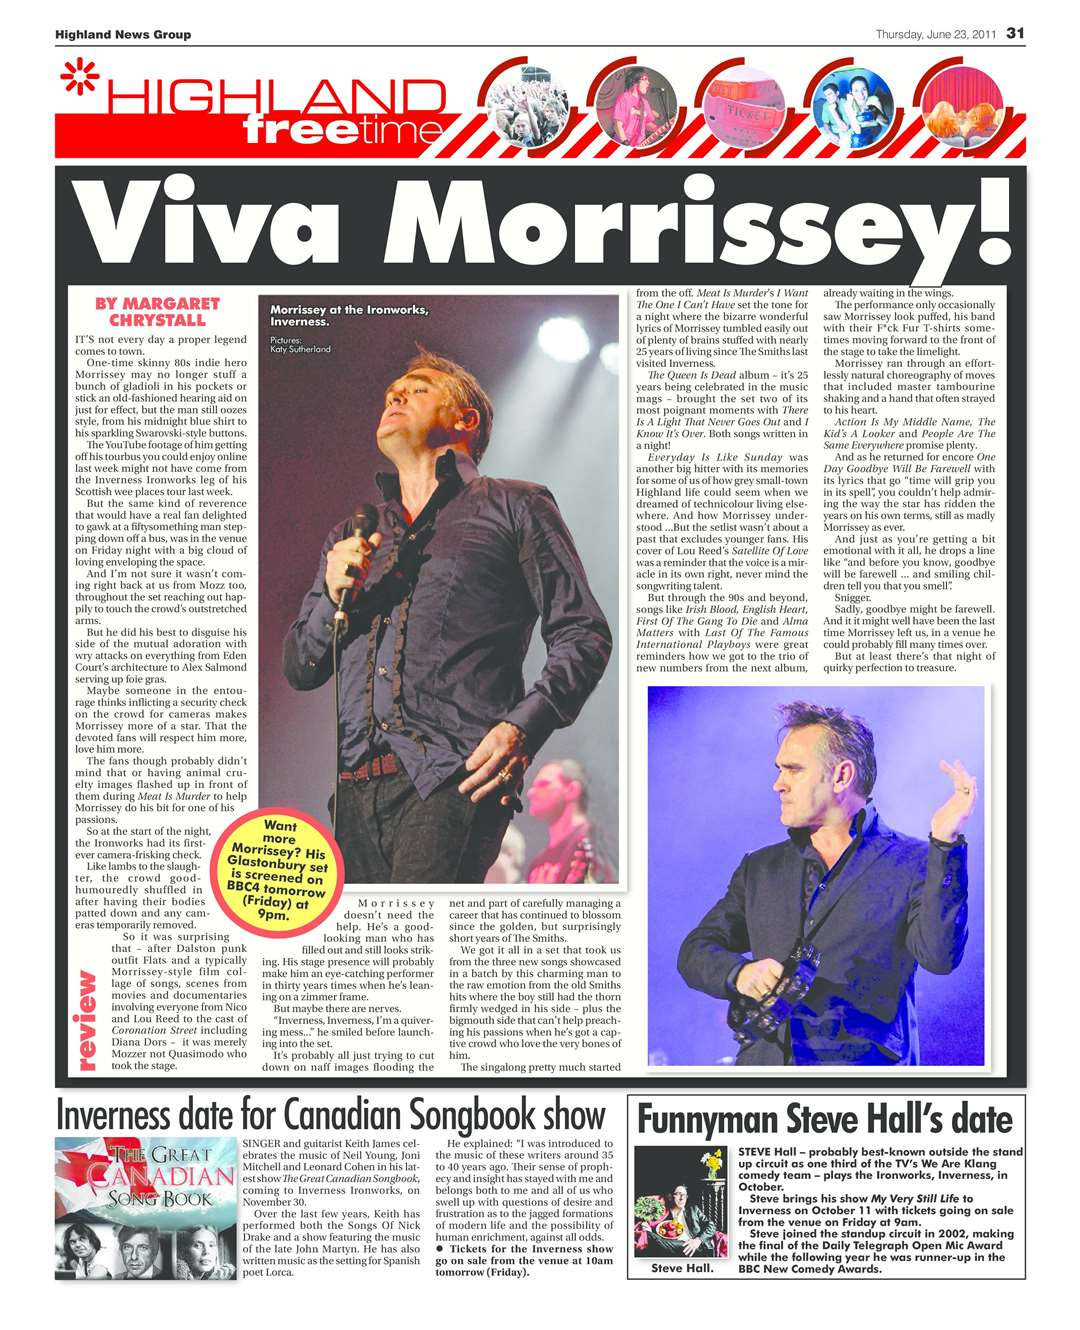 Morrissey - you want the one you can't have. But the crowd were lucky with a vintage performance.